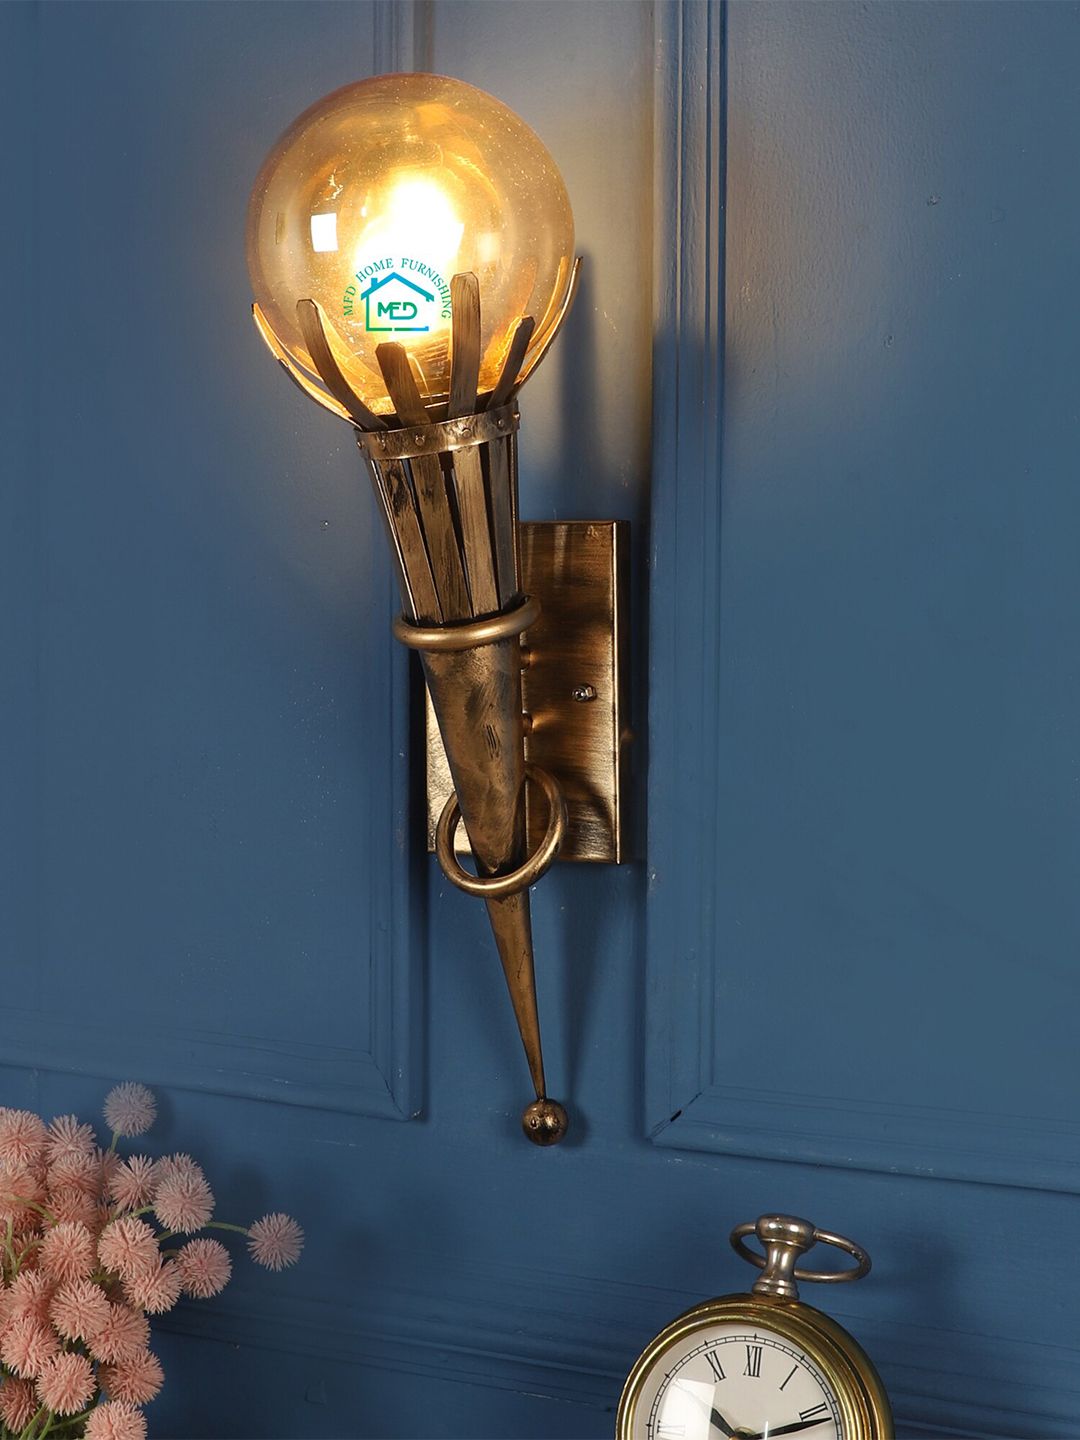 MFD HOME FURNISHING Gold-Toned Quirky Wall Lamp Price in India